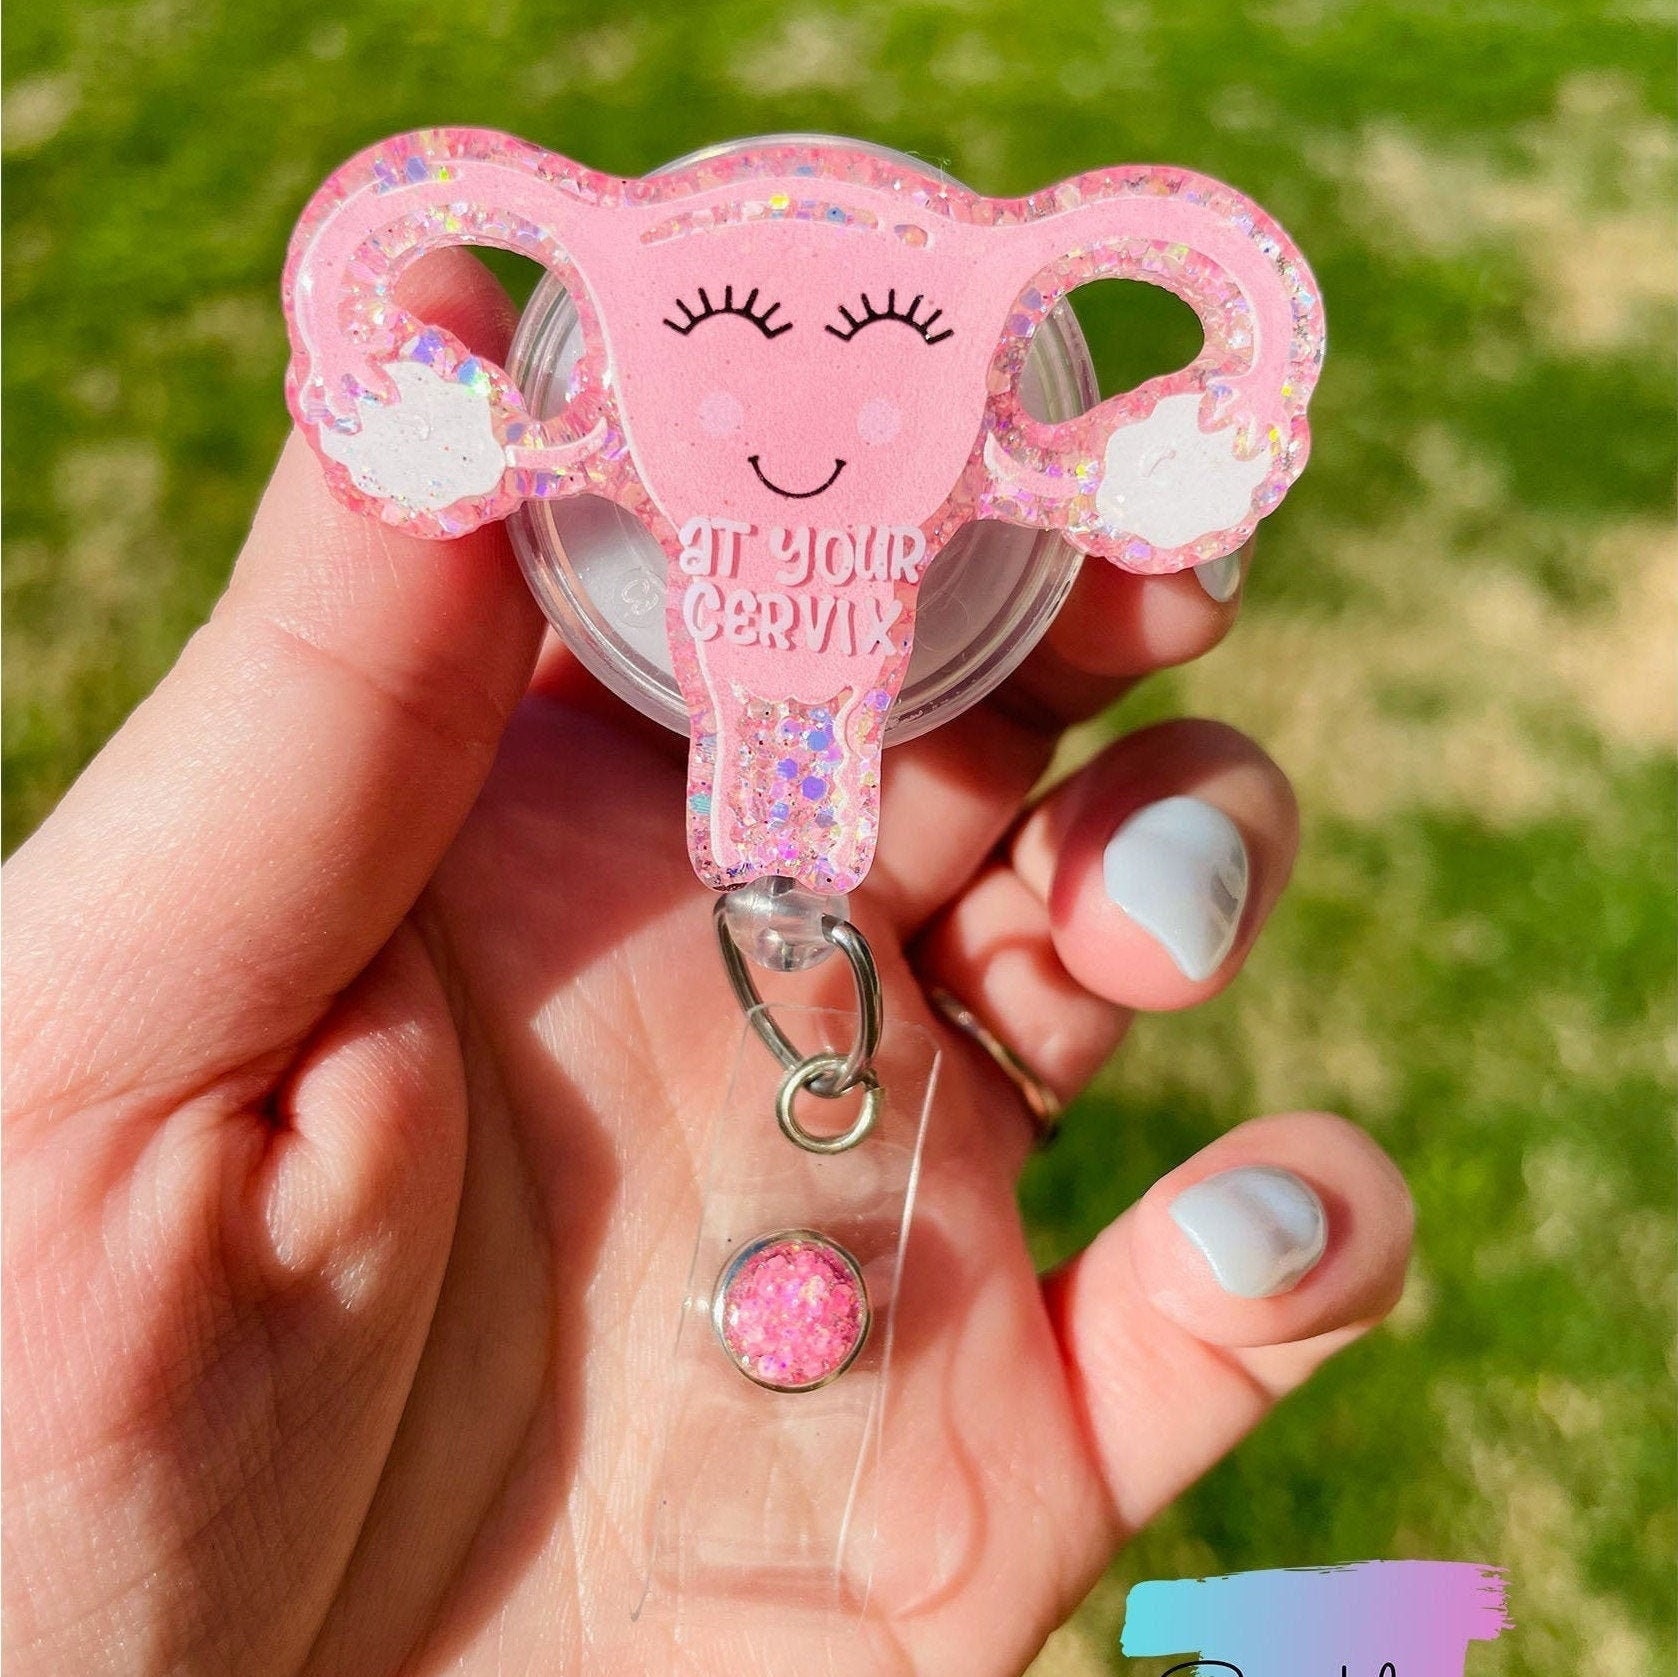 Uterus at Your Cervix Badge Reel, Funny Badge Reel, OBGYN Name Tag